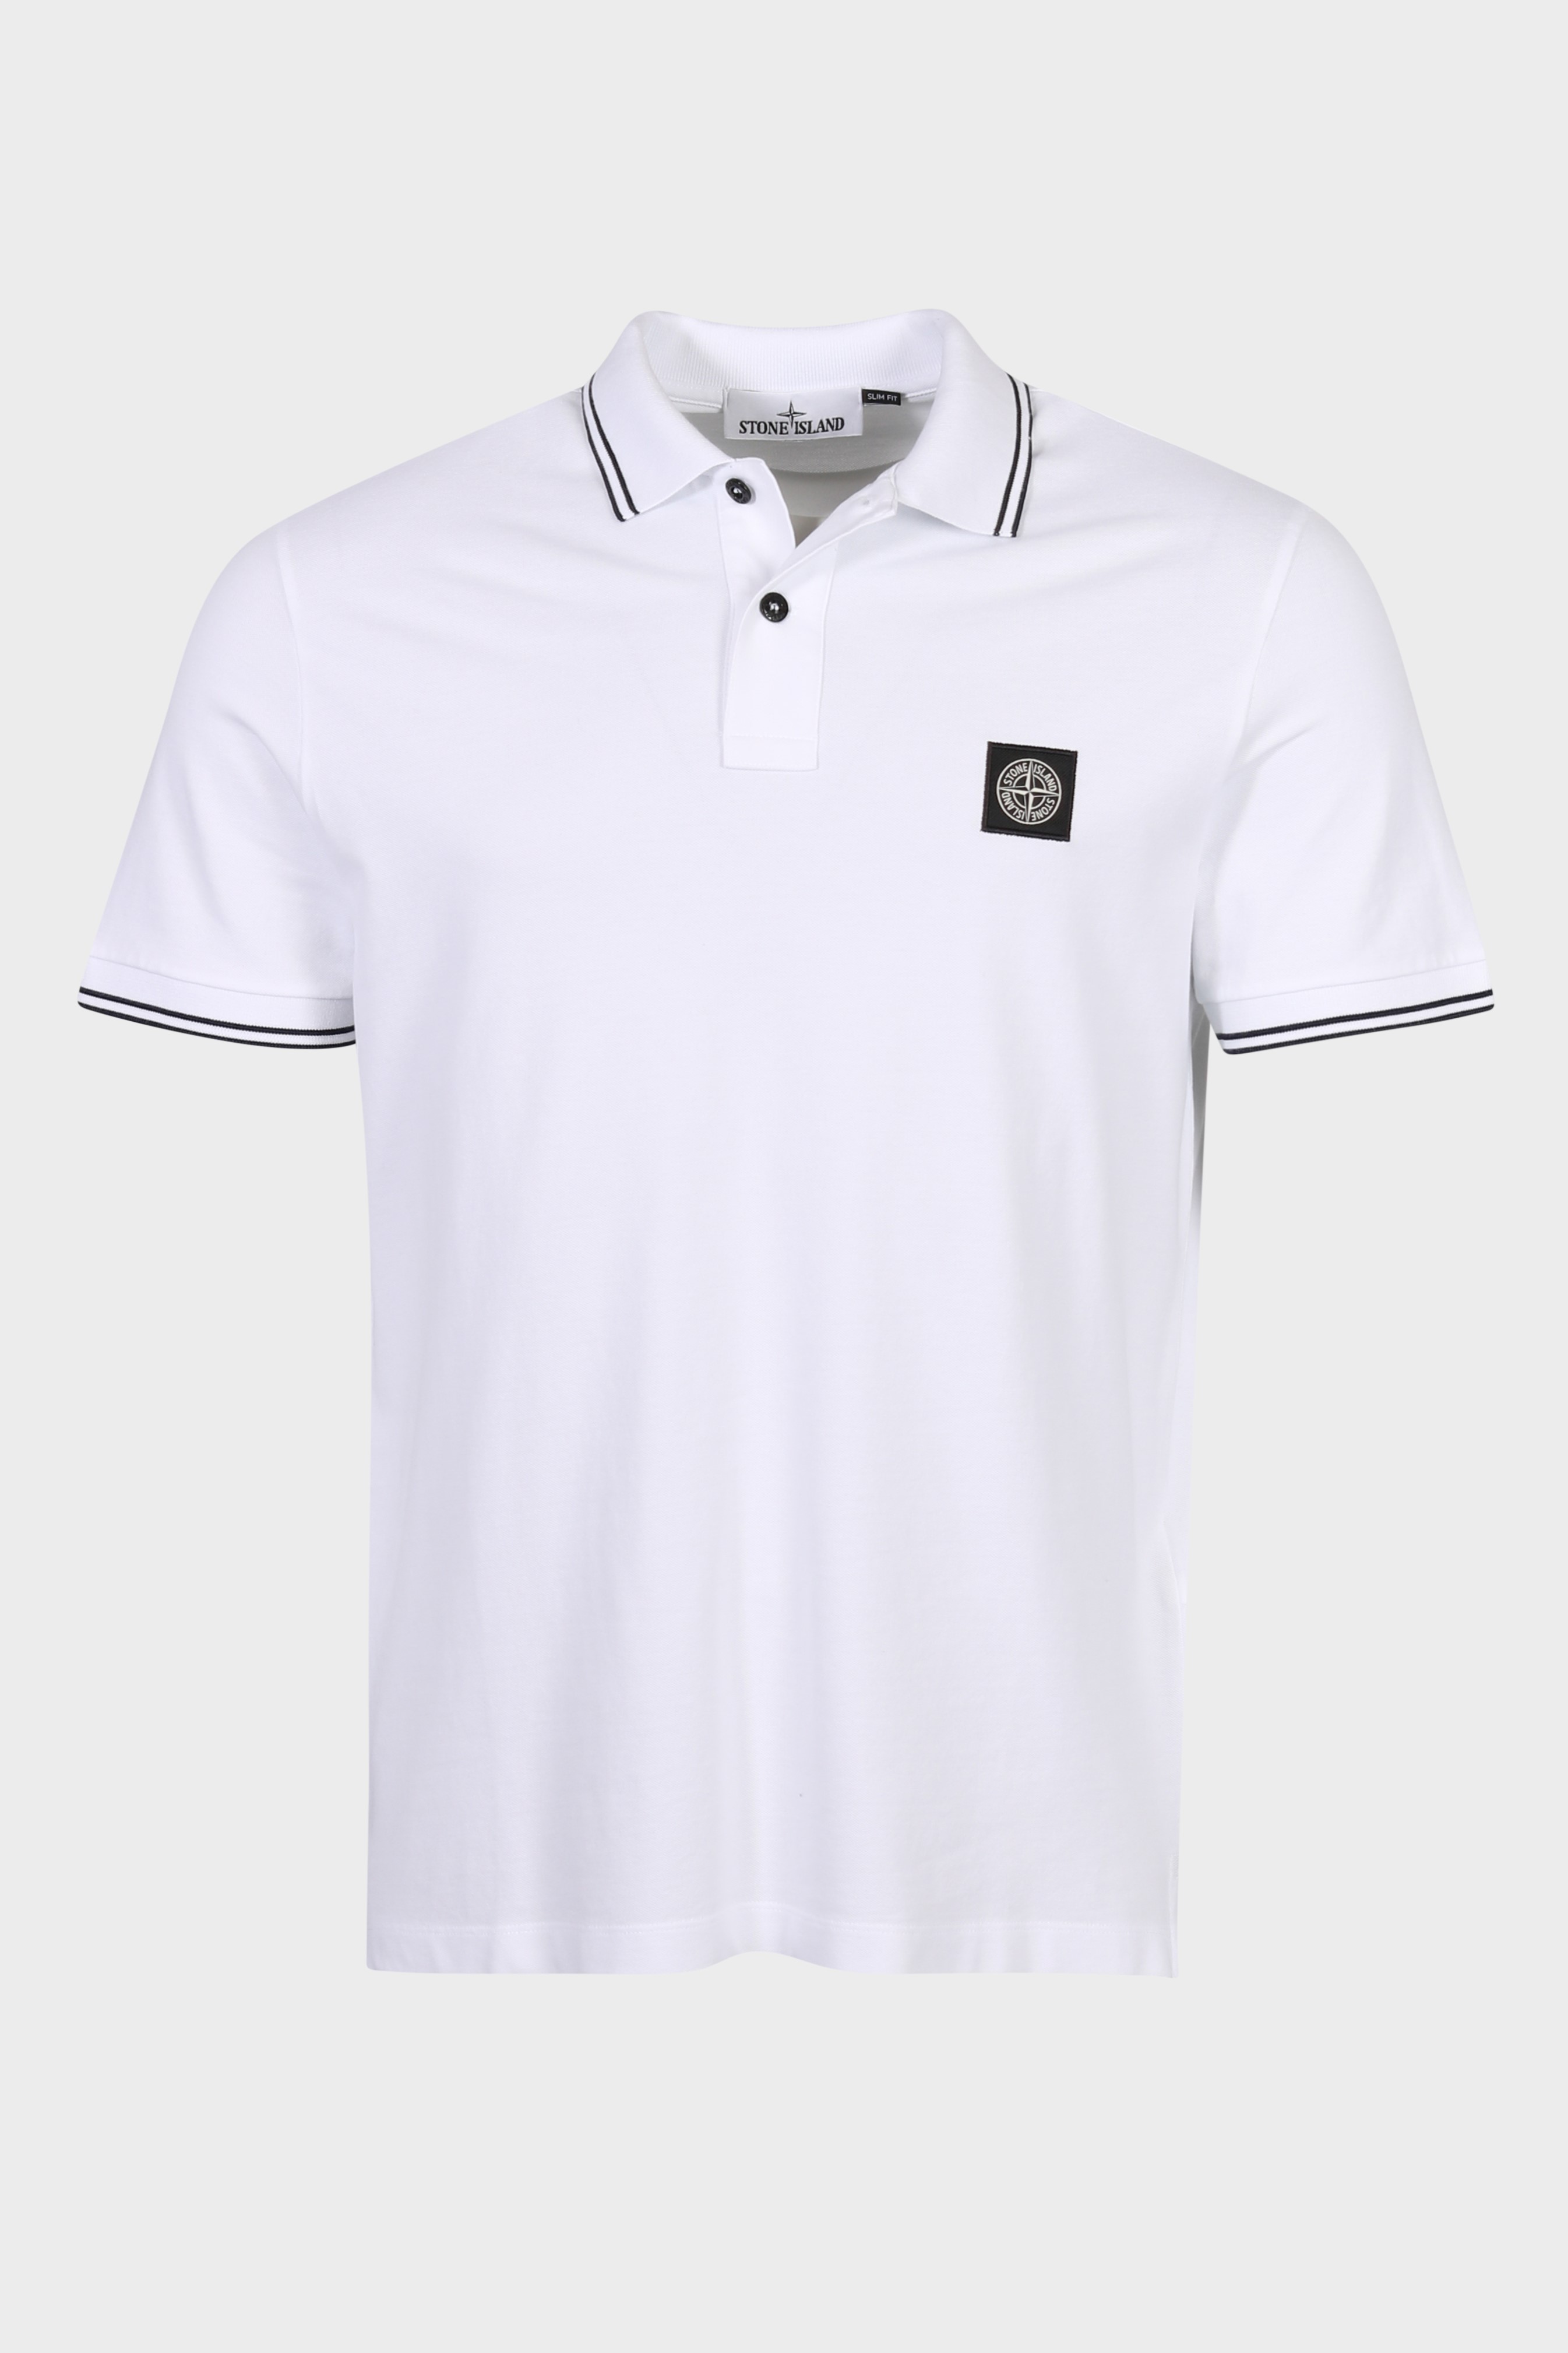 STONE ISLAND Slim Fit Polo Shirt in White